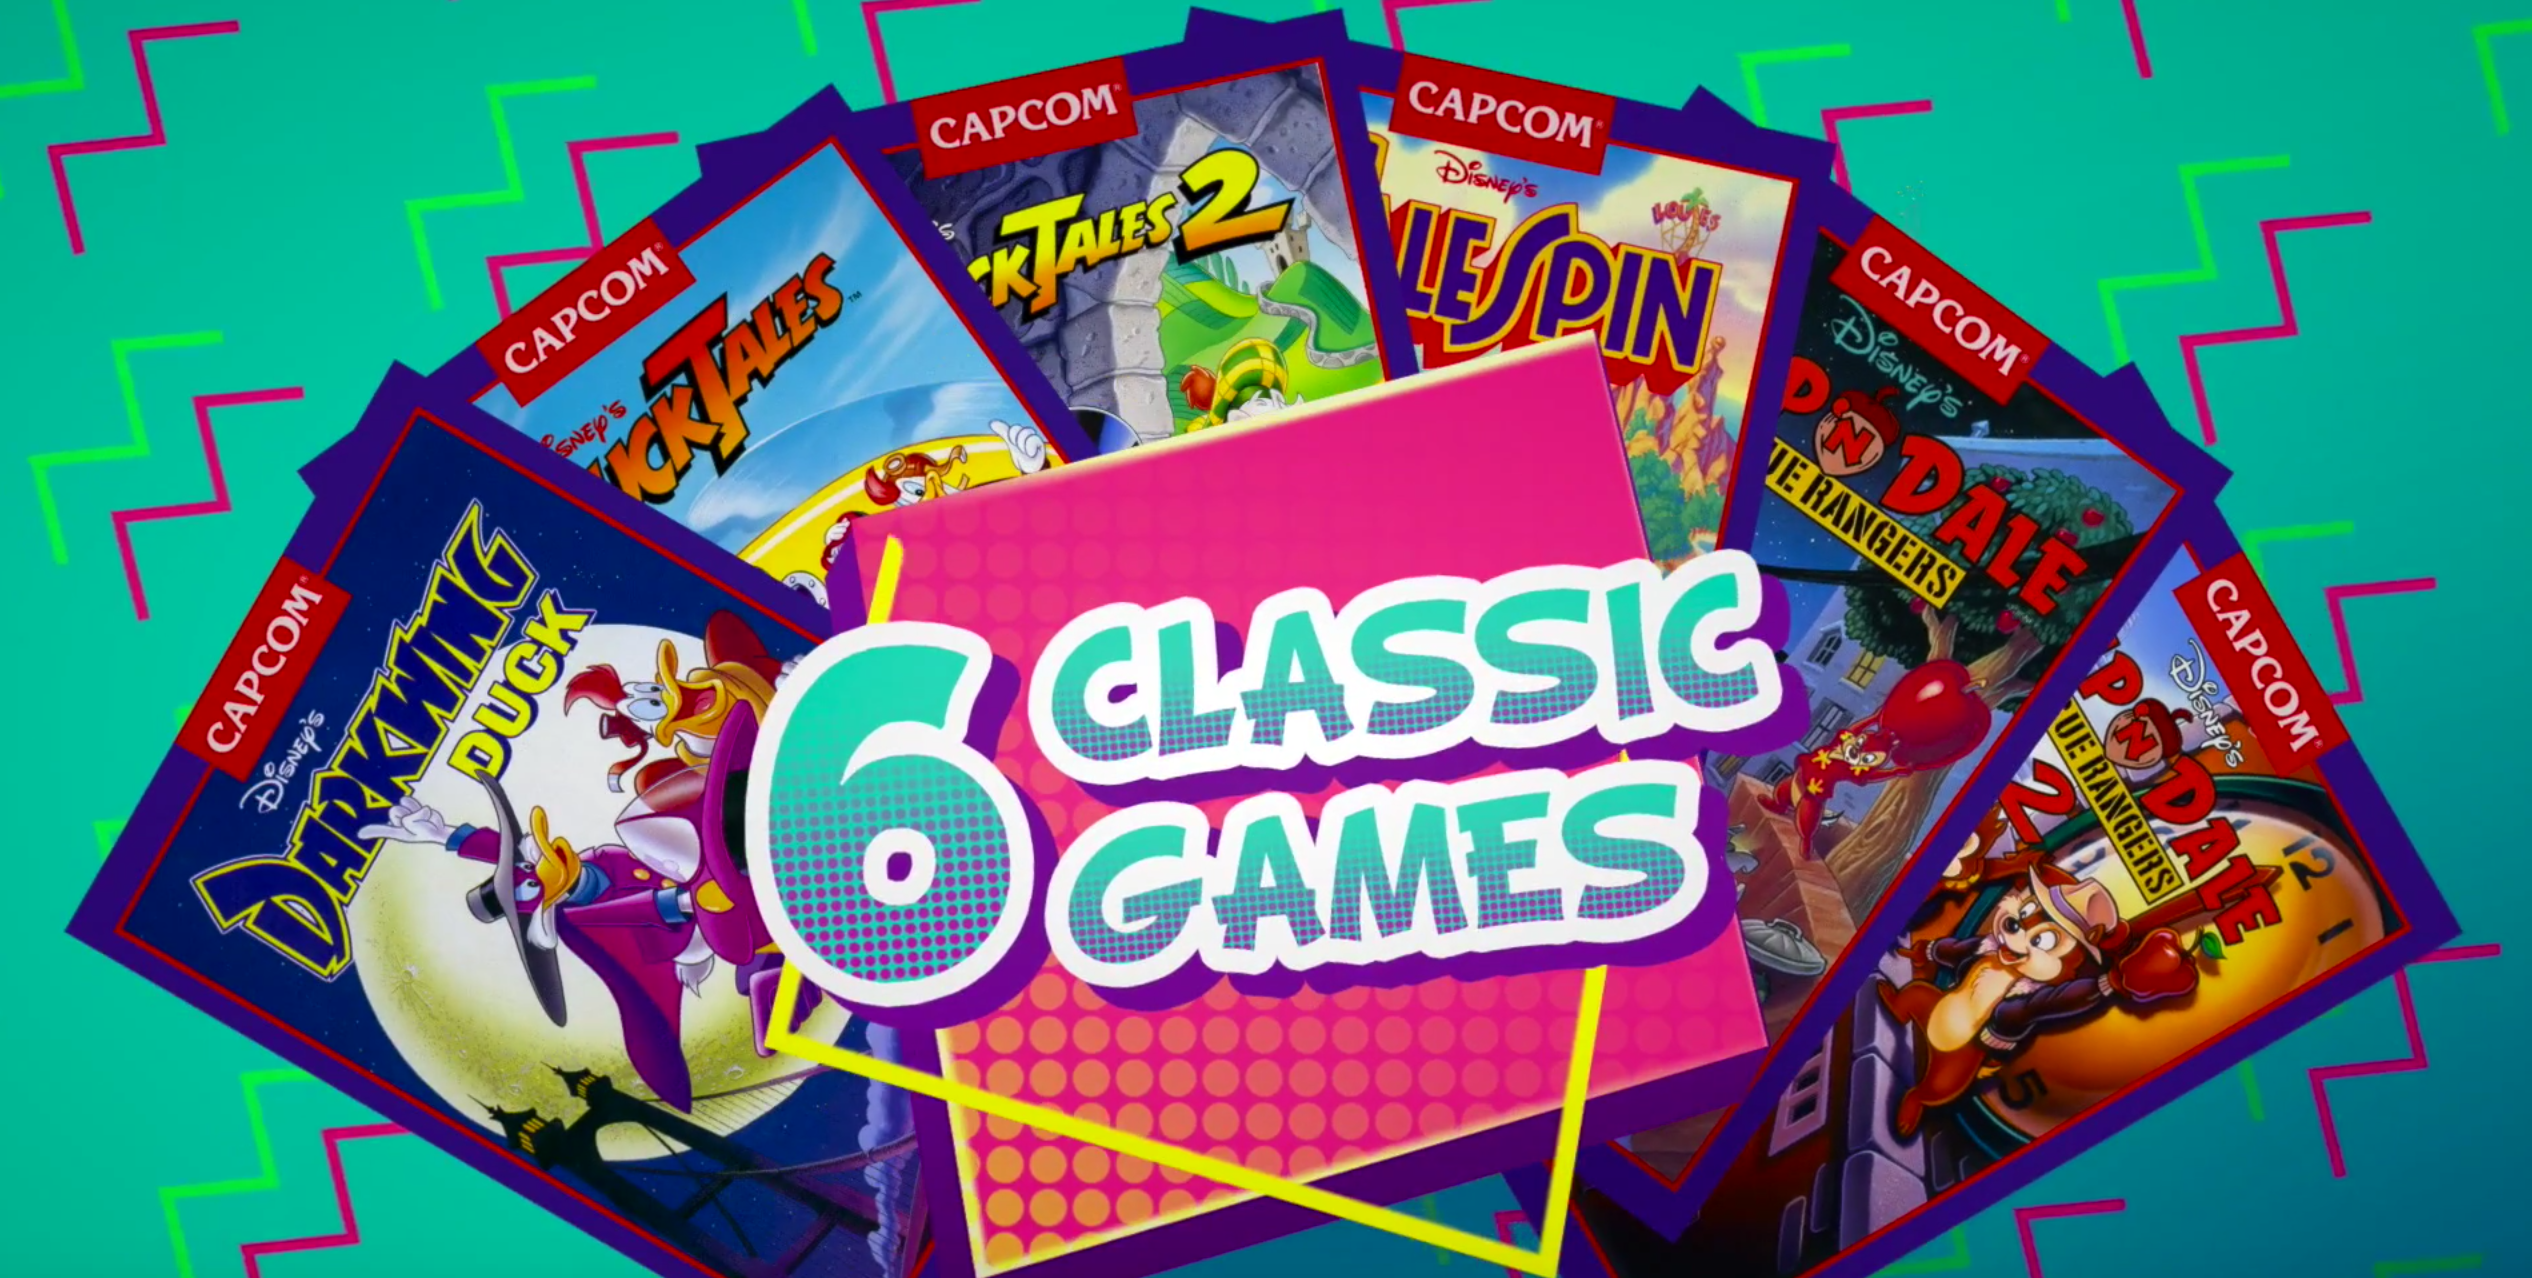 Relive 6 NES classics w/ the new Capcom Disney Collection for PS4/Xbox One: Chip 'n Dale, Duck, DuckTales and more